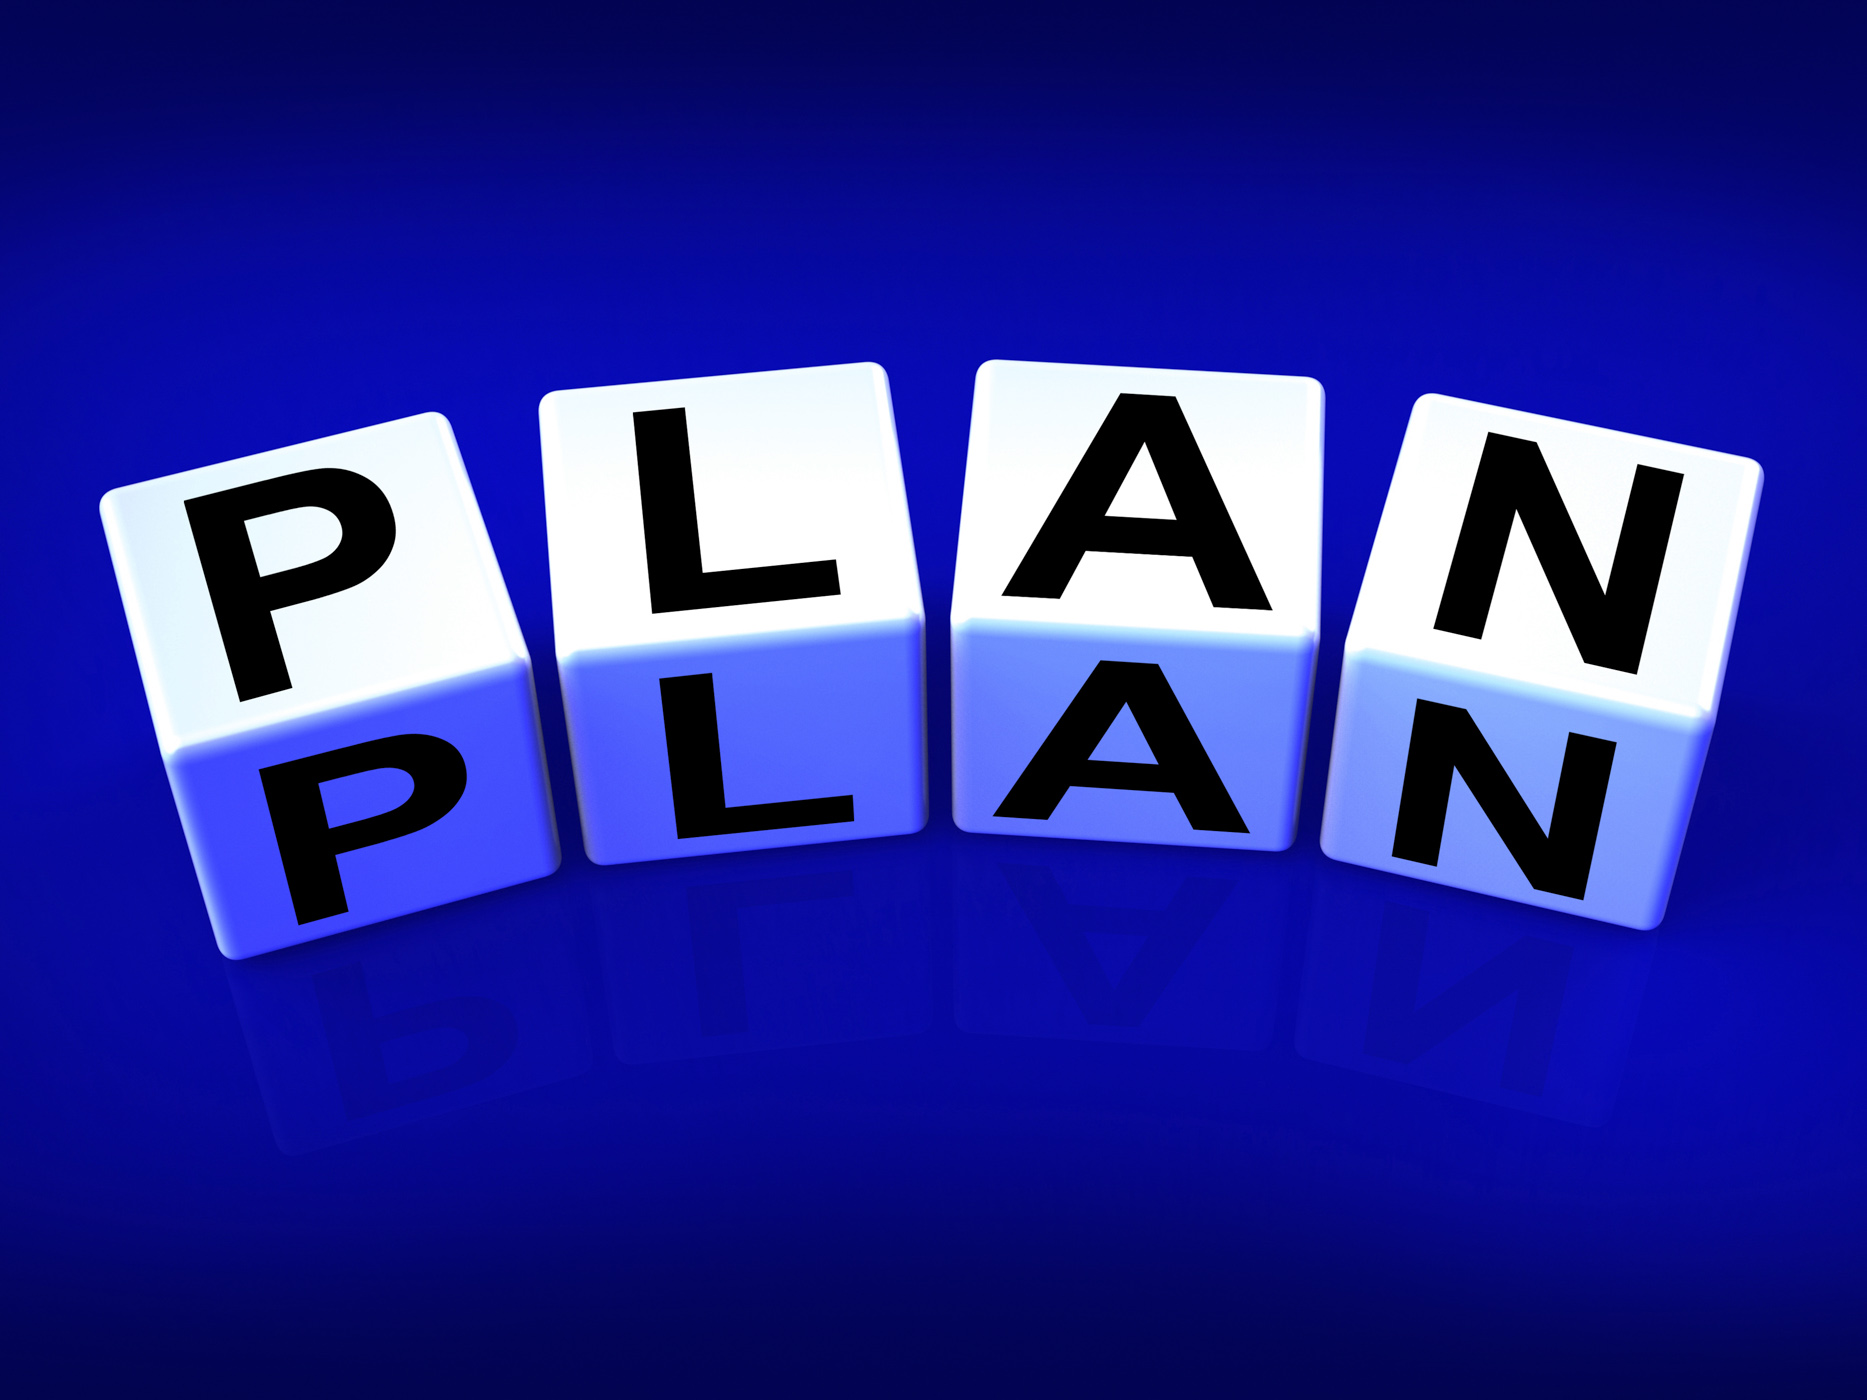 Plan blocks mean targets strategies and plans photo